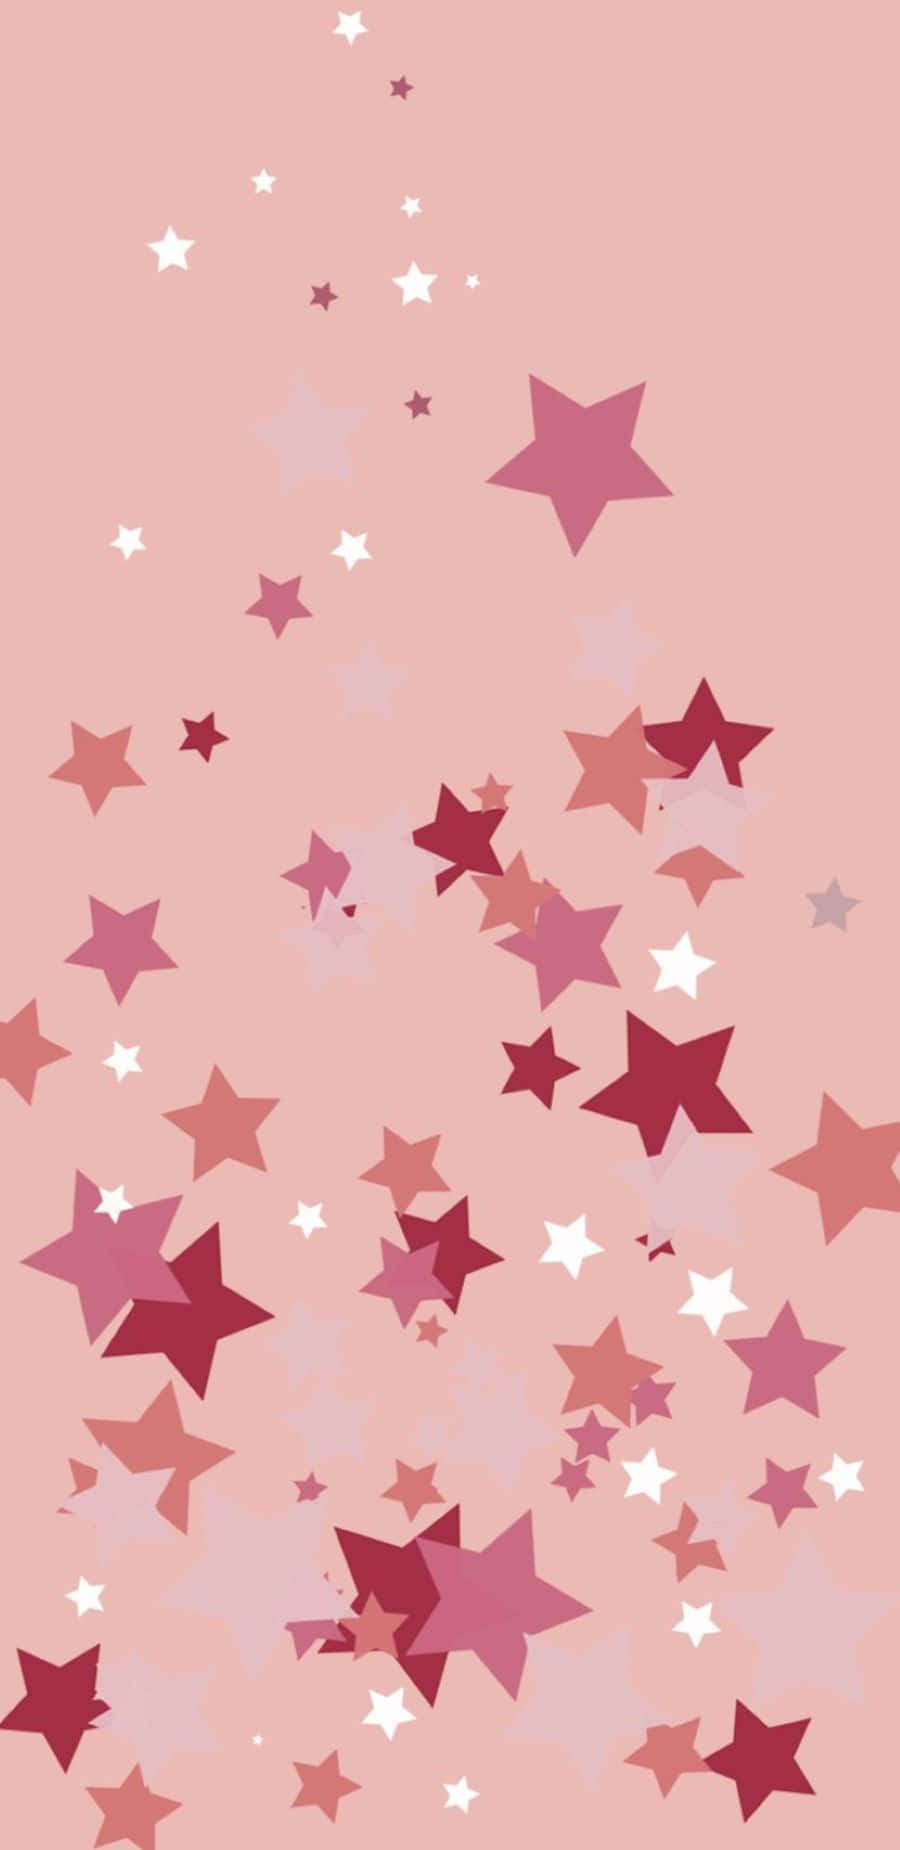 Brighten up your bedroom with this Aesthetic Star wallpaper! Wallpaper